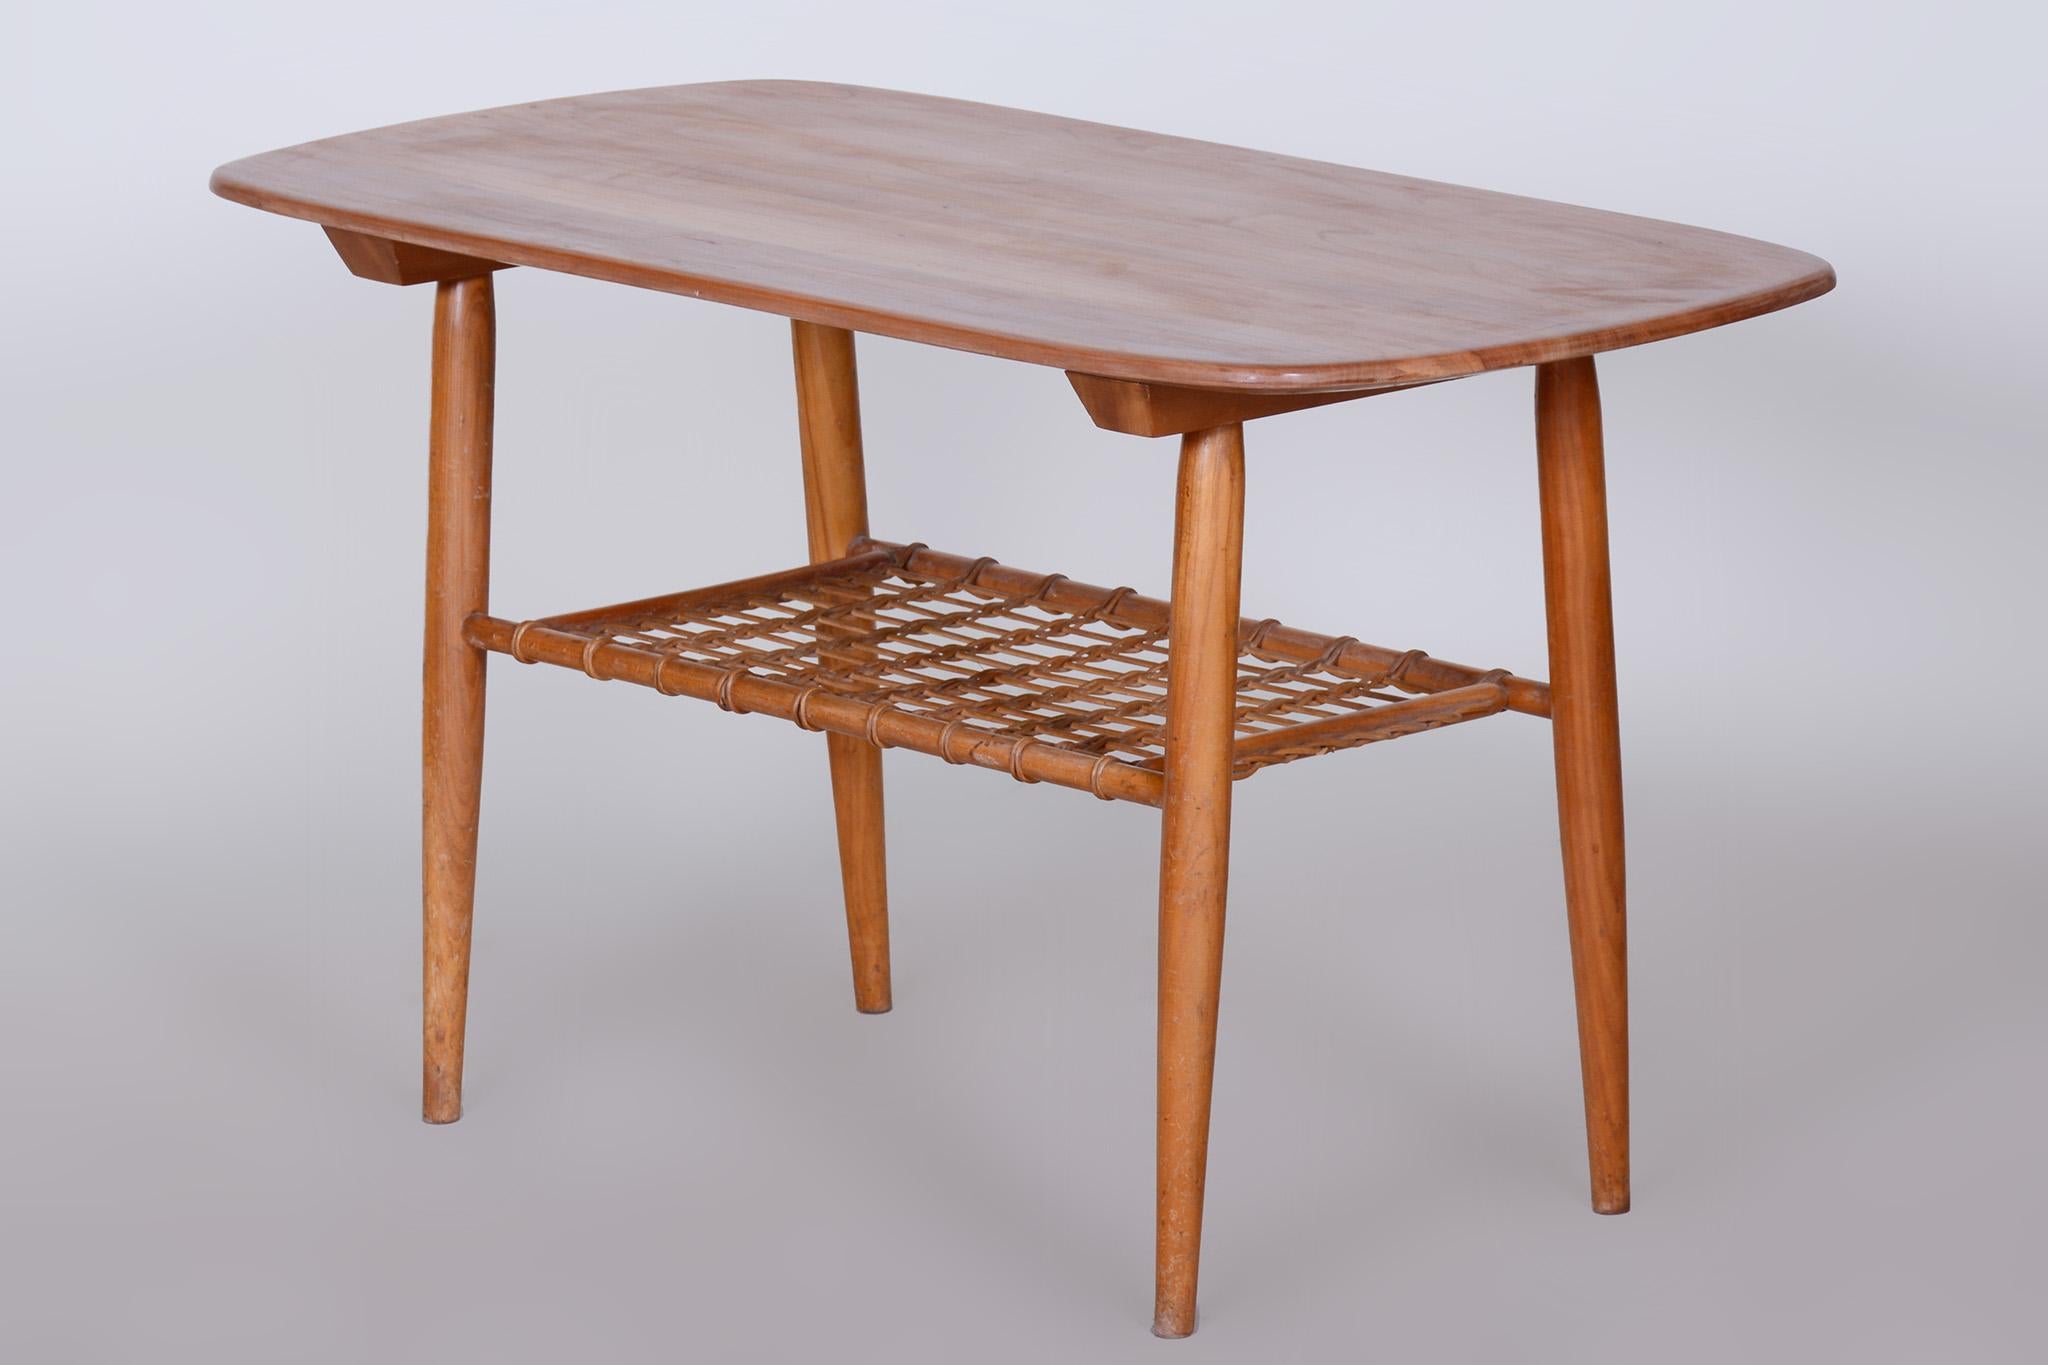 Wood Restored Mid-Century Style Coffee Table, Cherry-Tree, Rattan, 1950s, Czechia For Sale